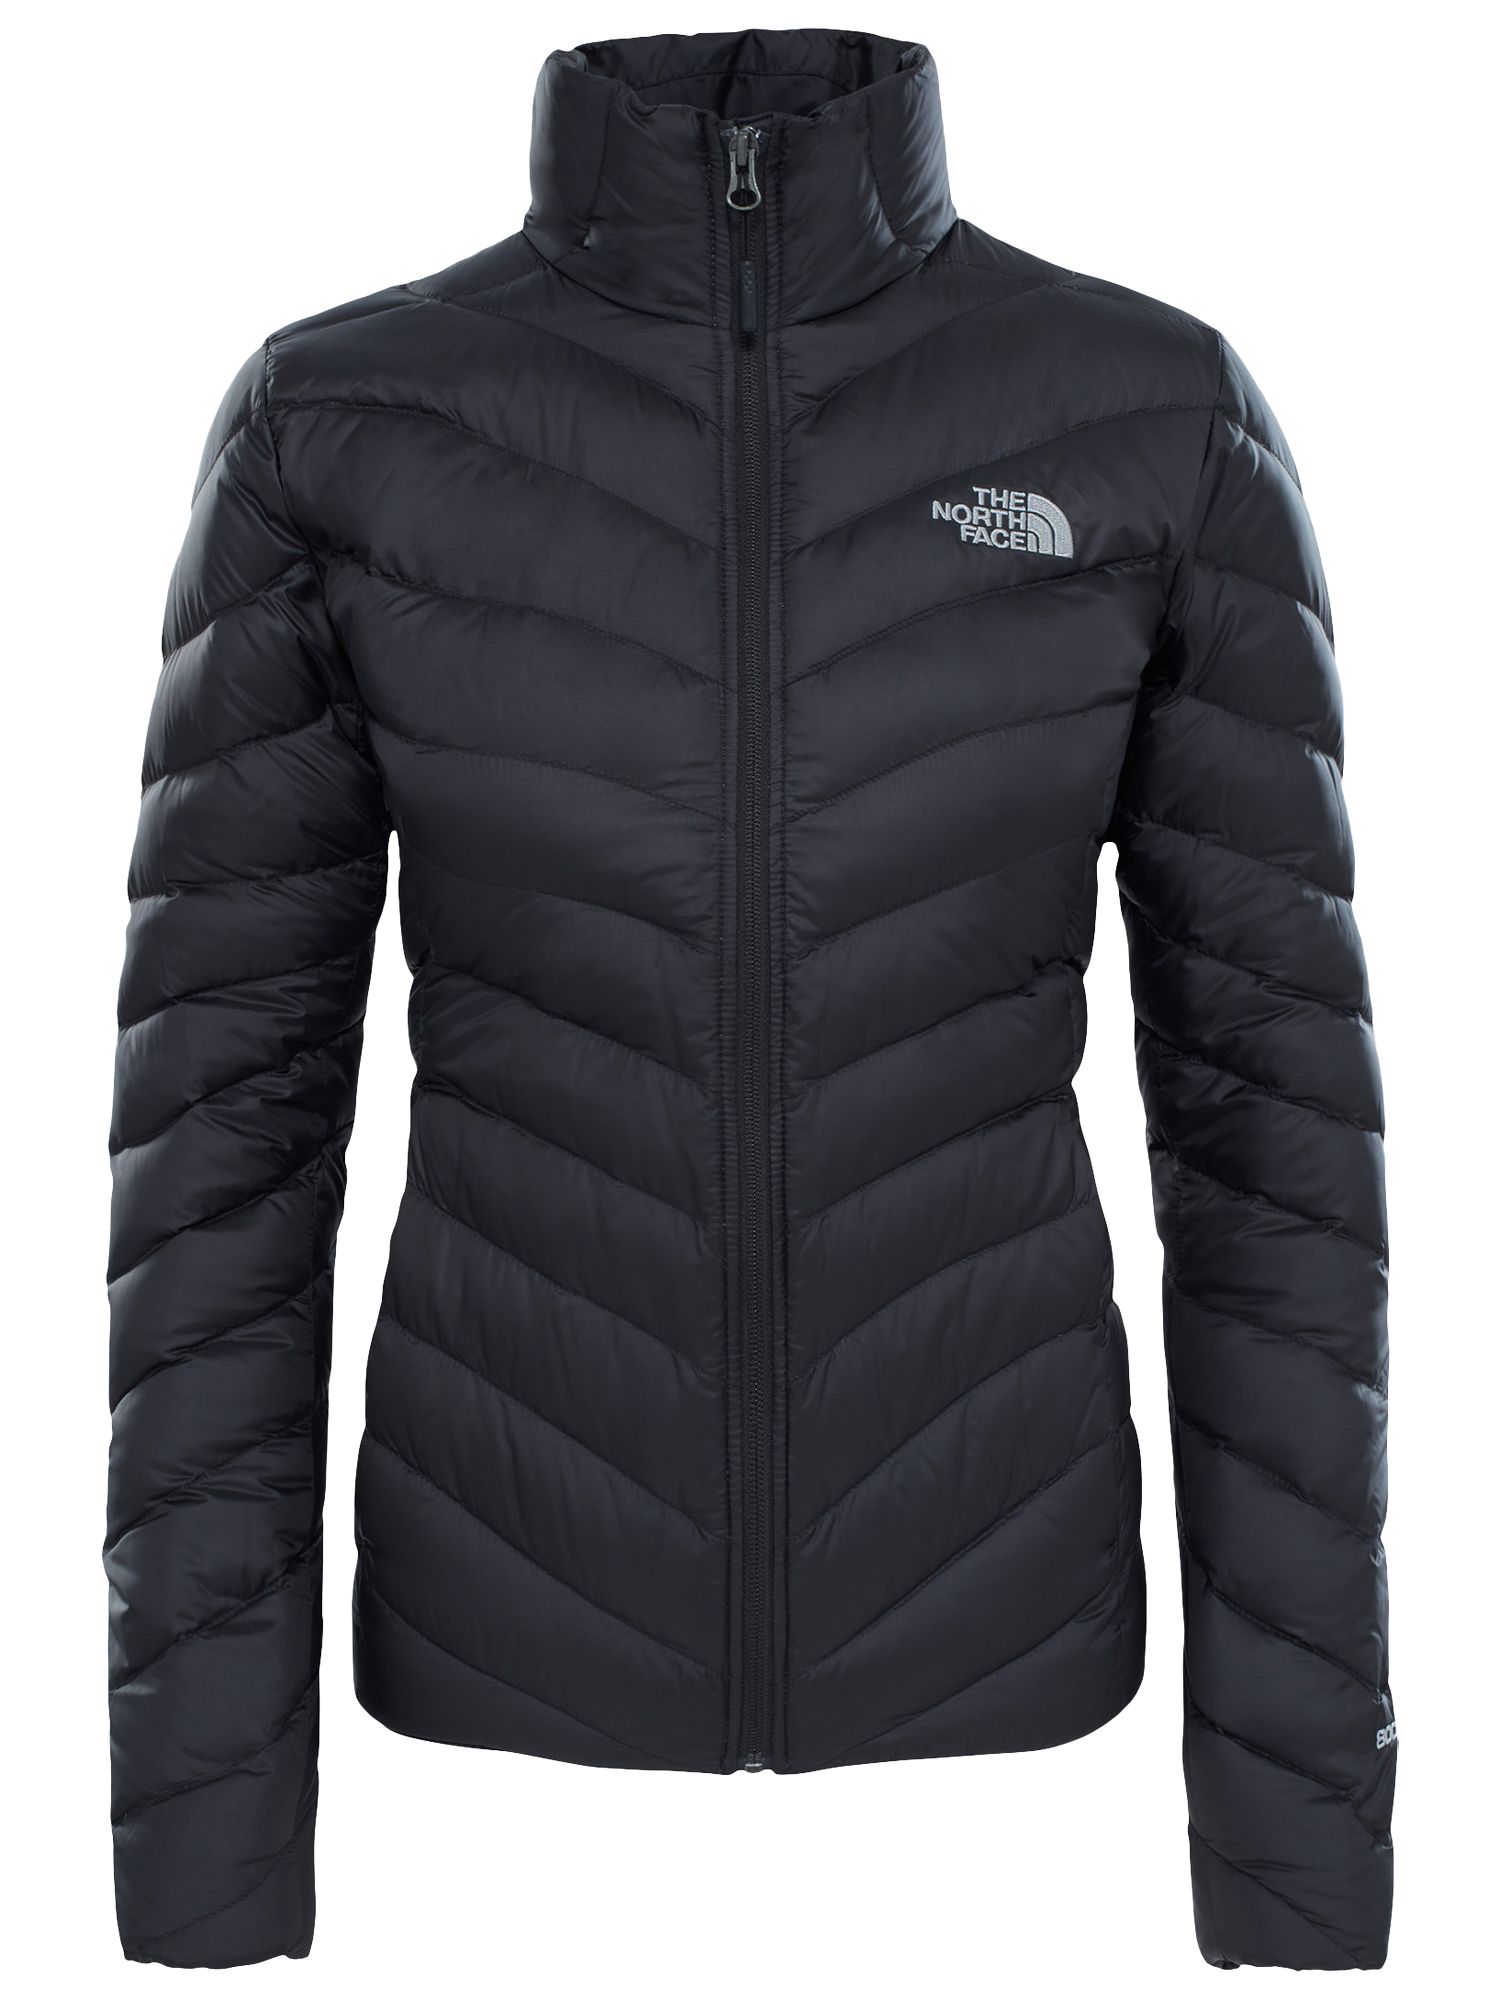 north face trevail jacket womens review 